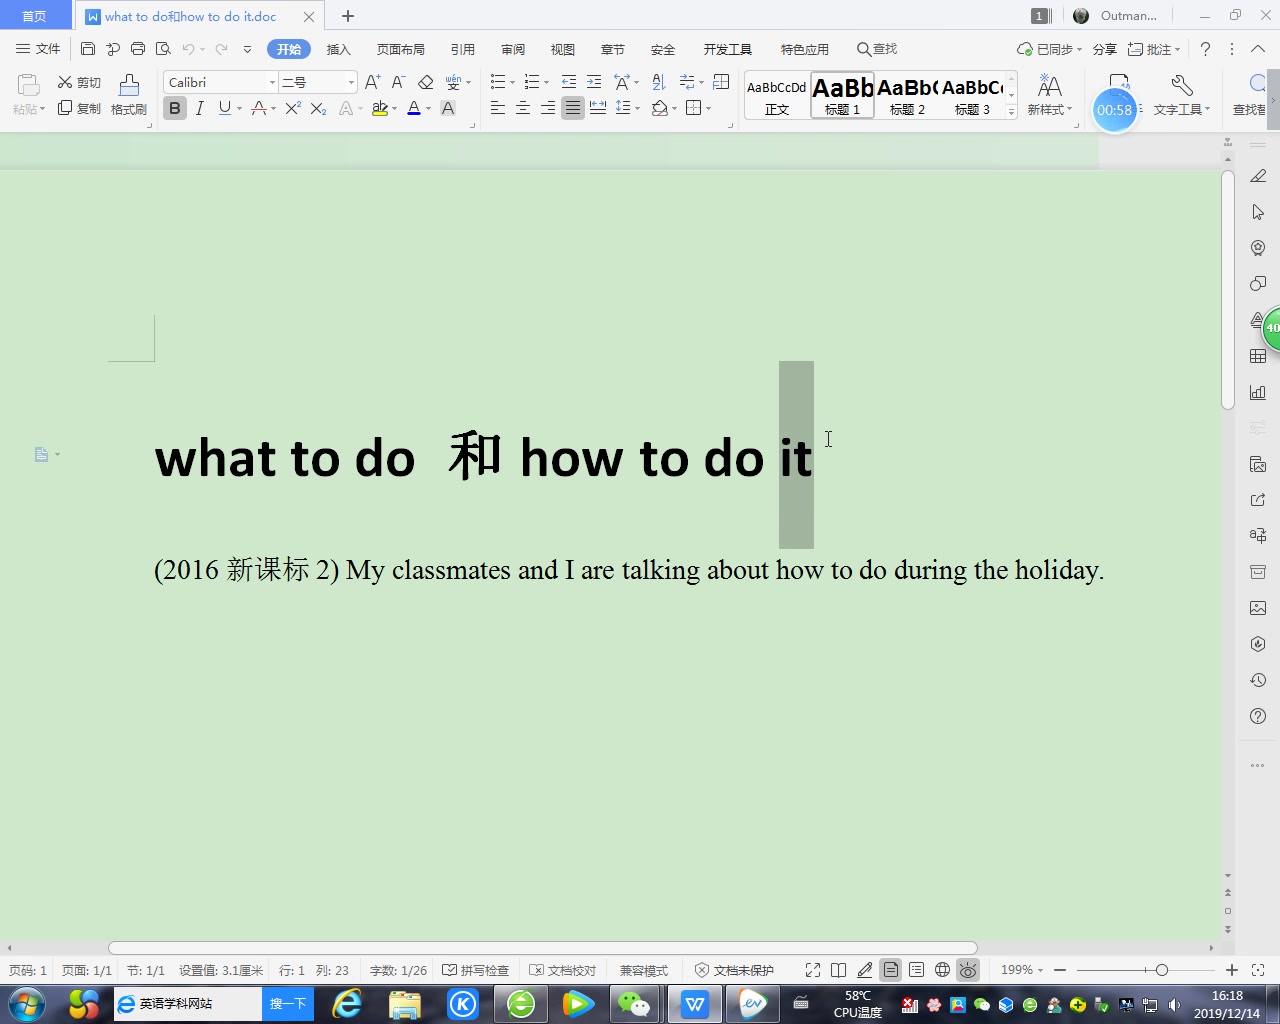 what to do 和how to do it